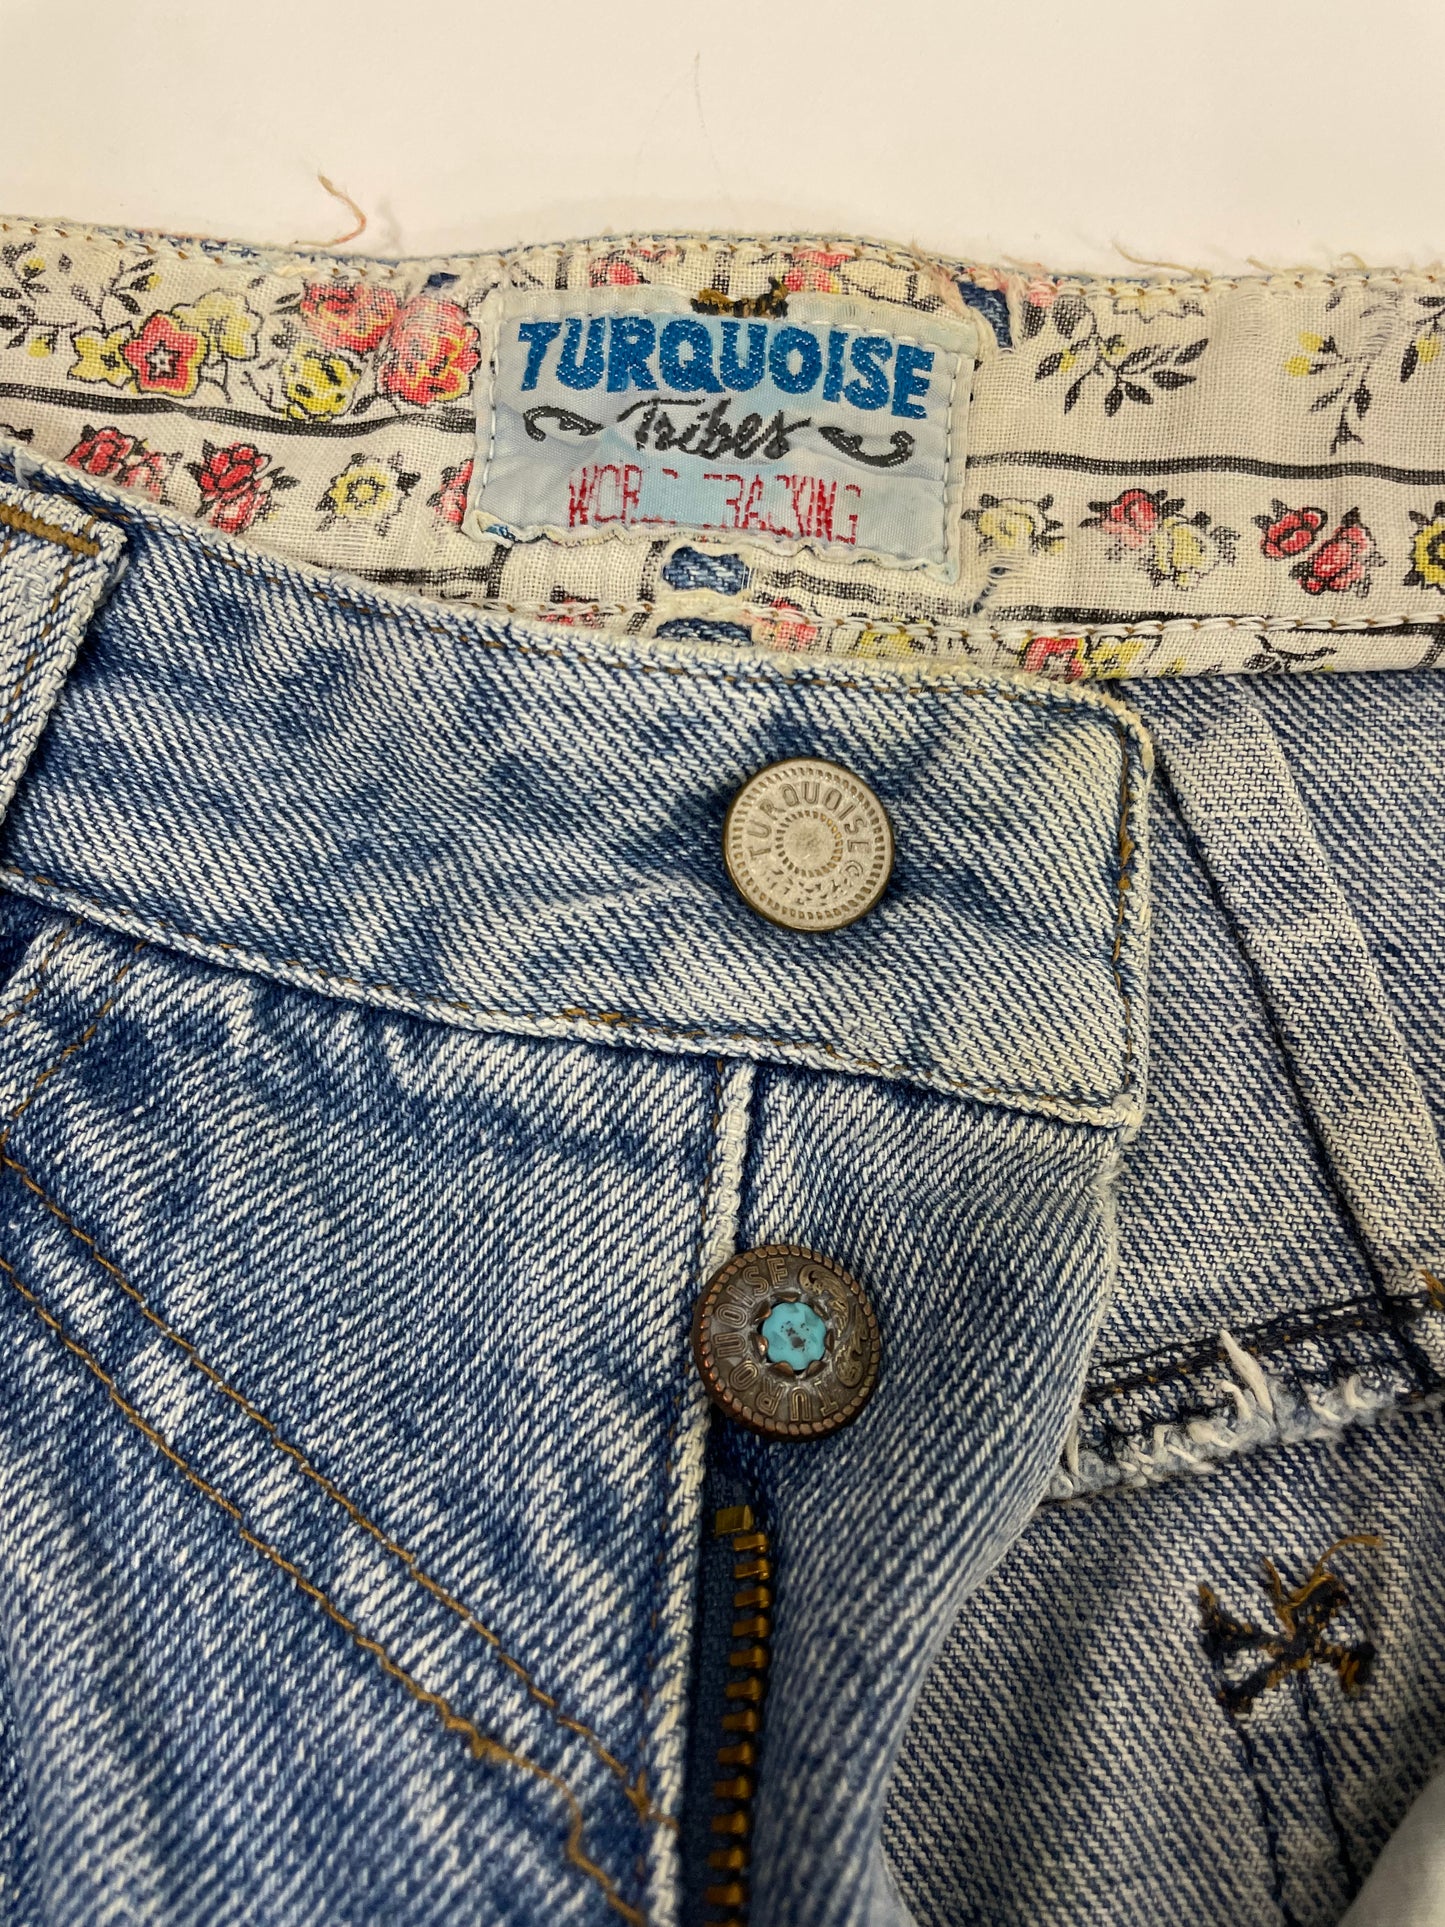 Turquoise Jeans 1970s